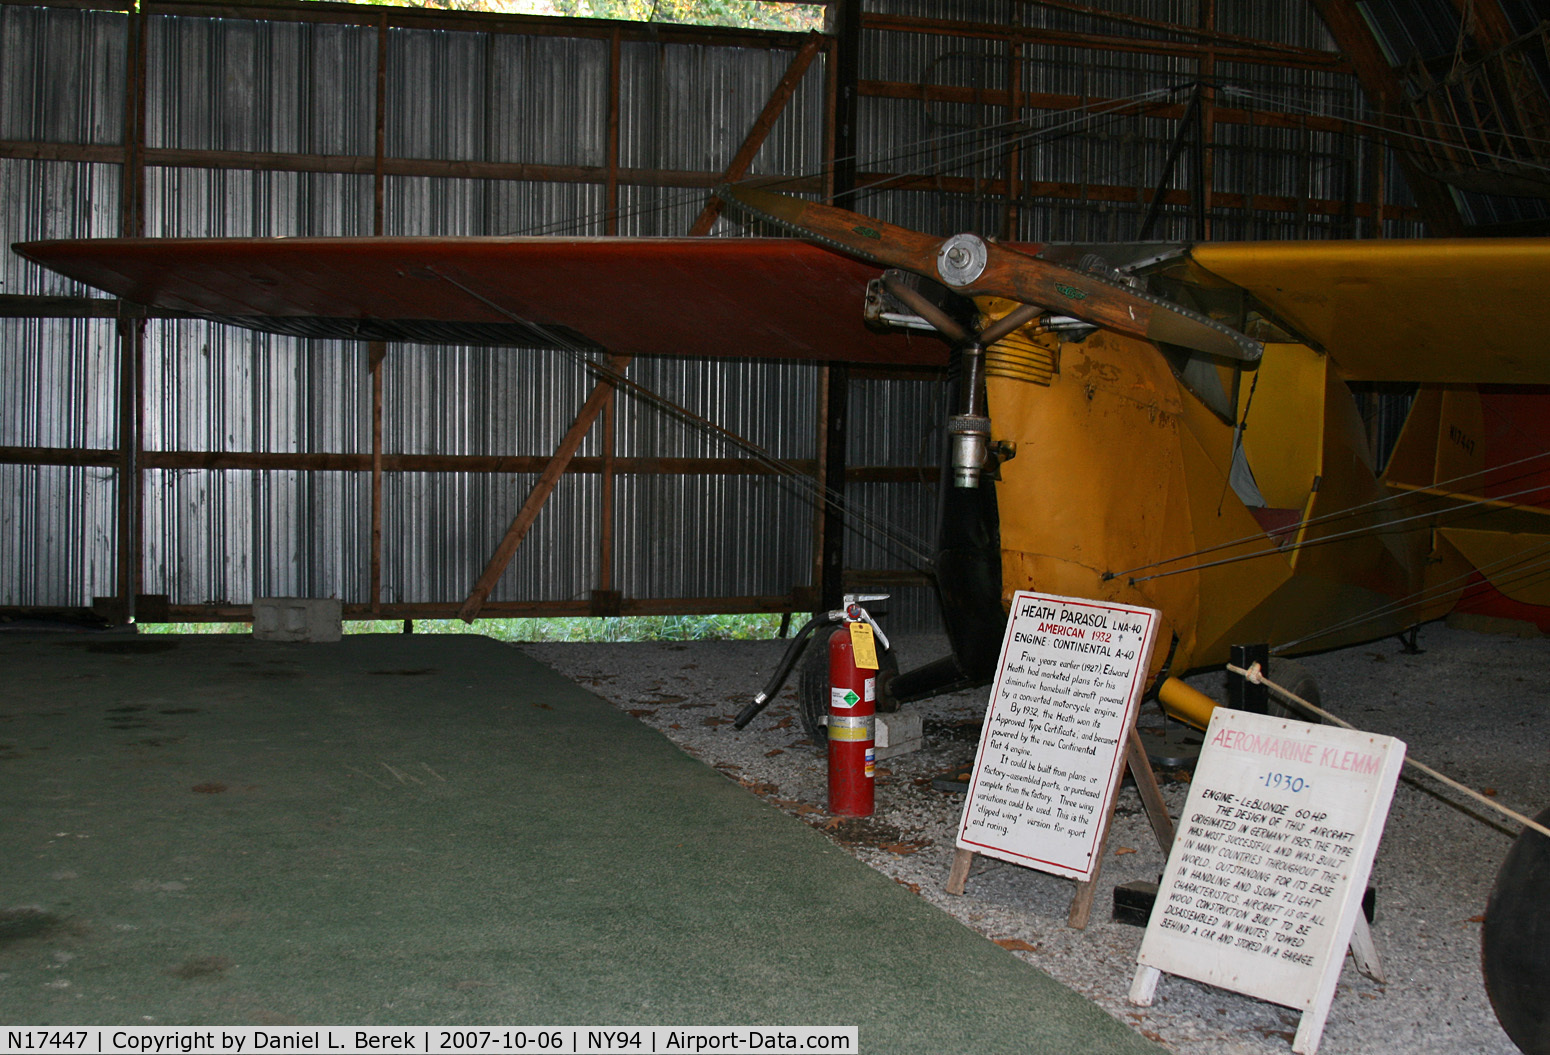 N17447, 1936 Aeronca C-3 C/N A-754, Old Rhinebeck's 1936 Aeronca C-3 has now been retired to the Museum.